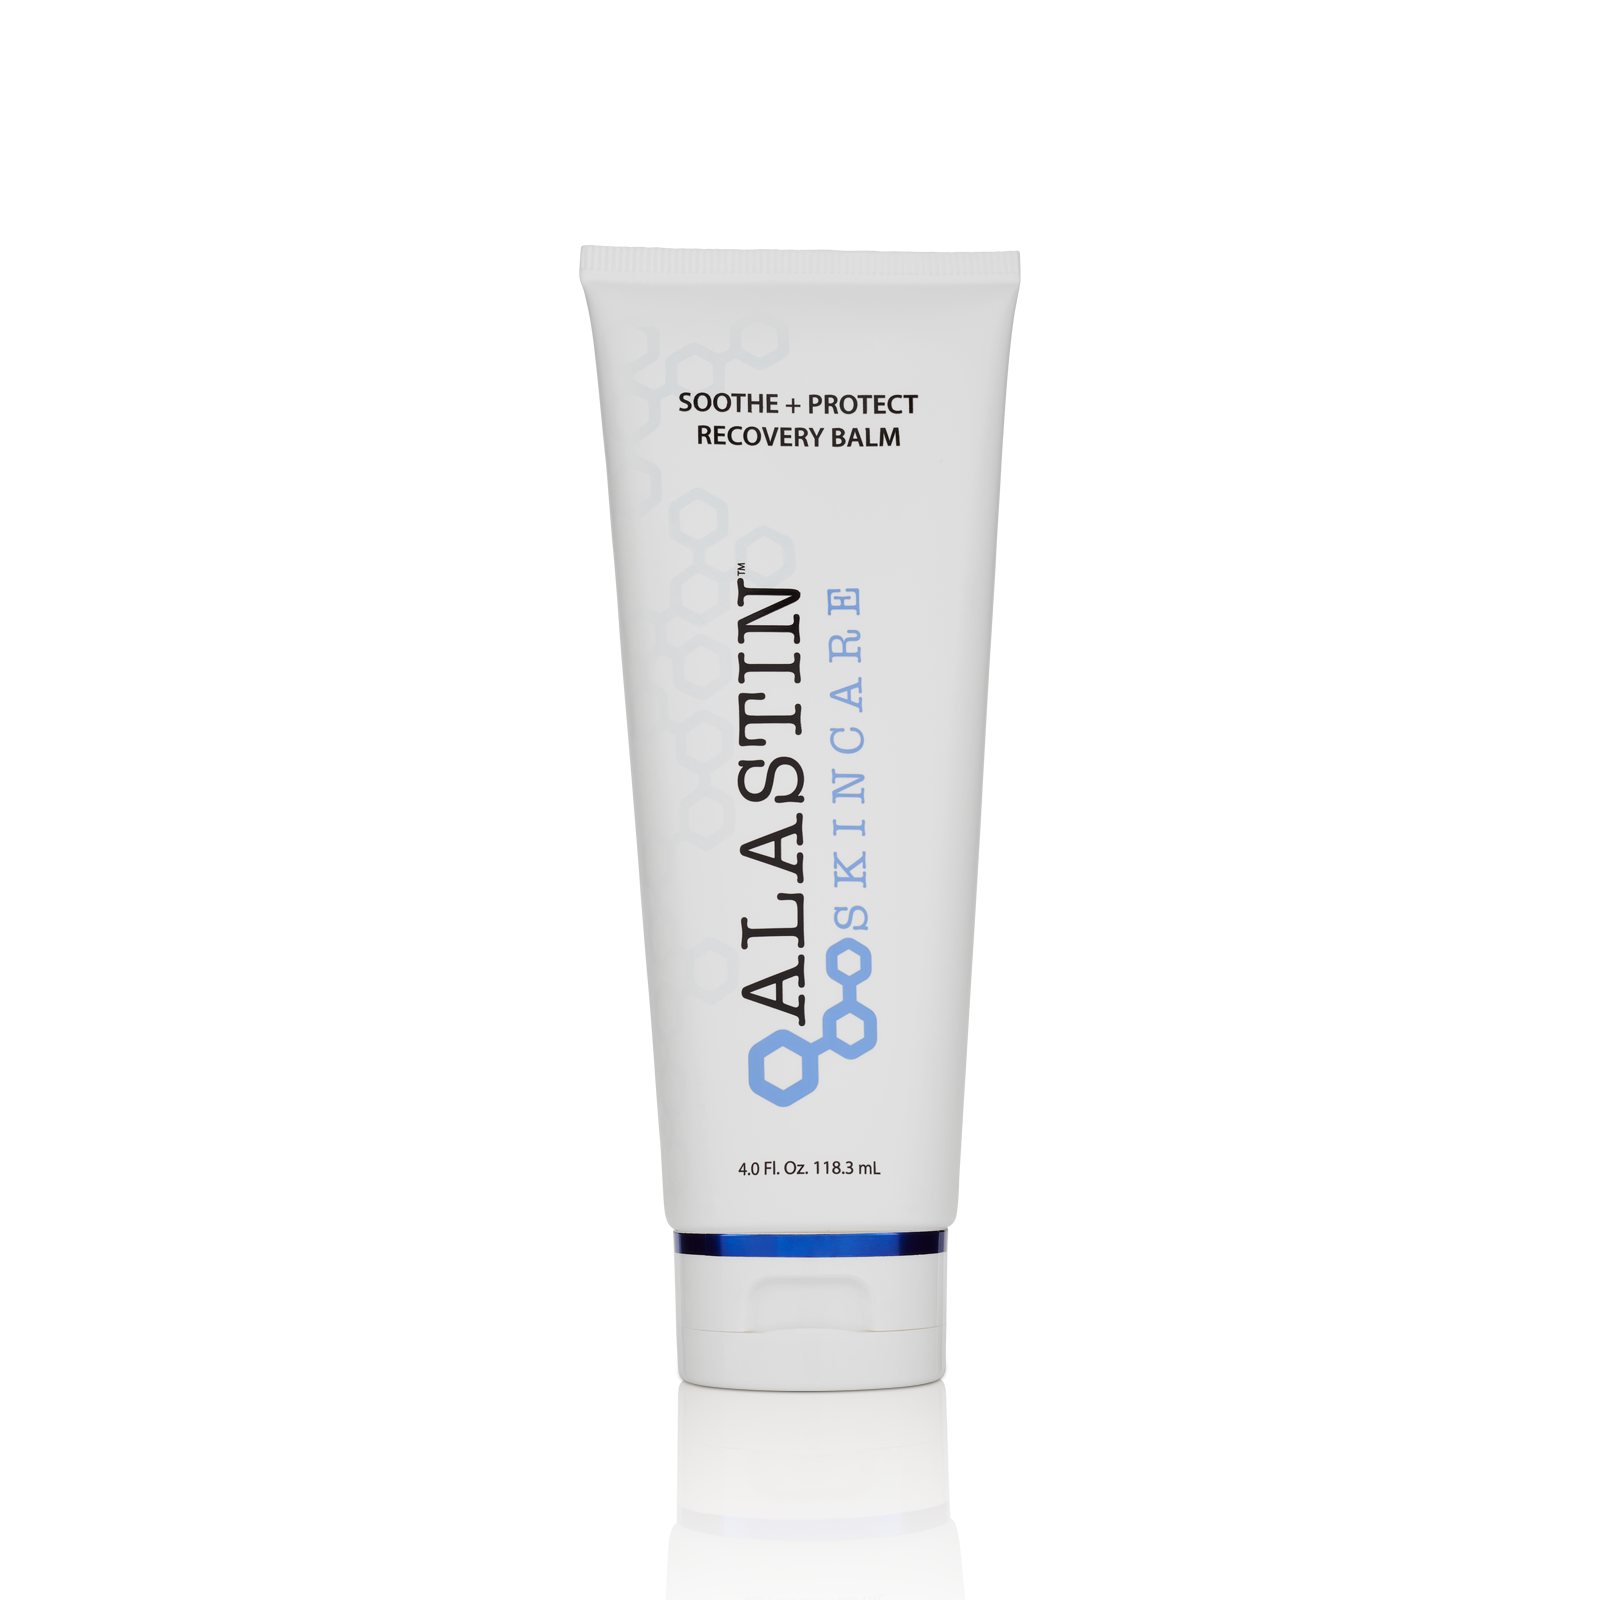 Soothe + Protect Skincare® Balm ALASTIN Recovery 